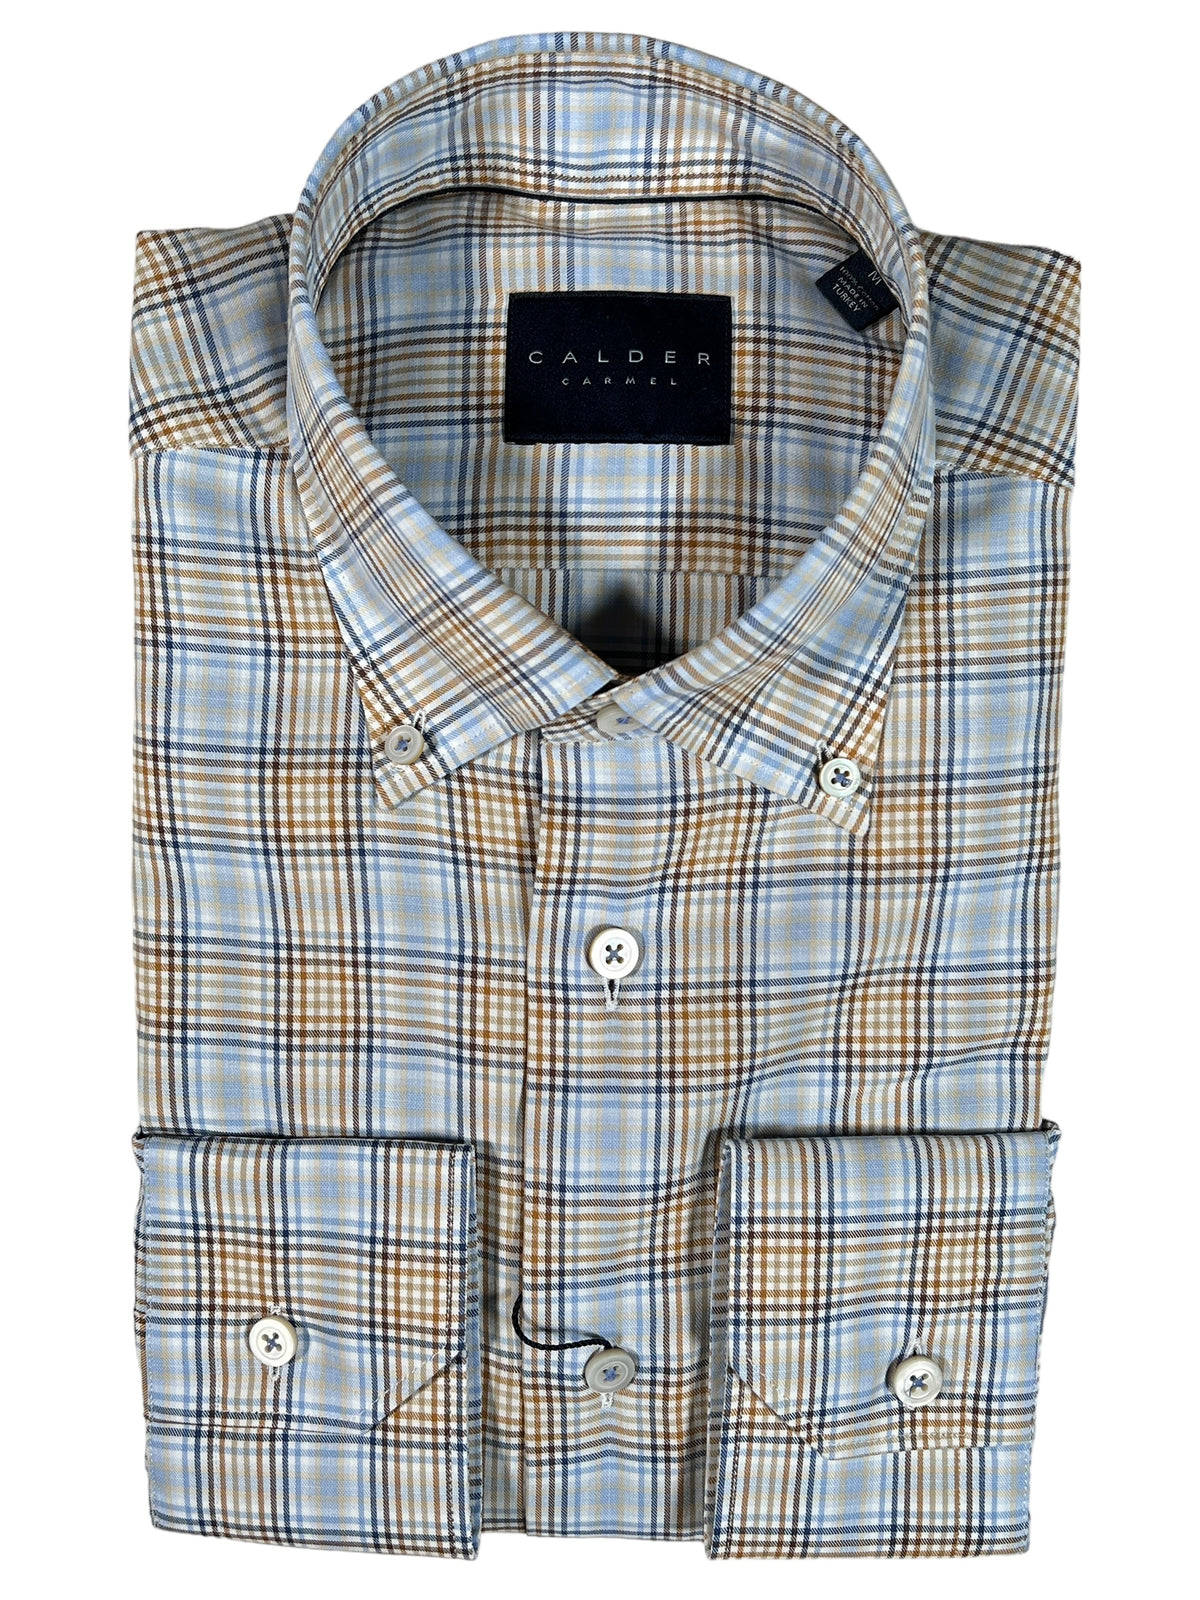 Casual Shirts for Men: A Beginner's Guide - Nickson Shirts